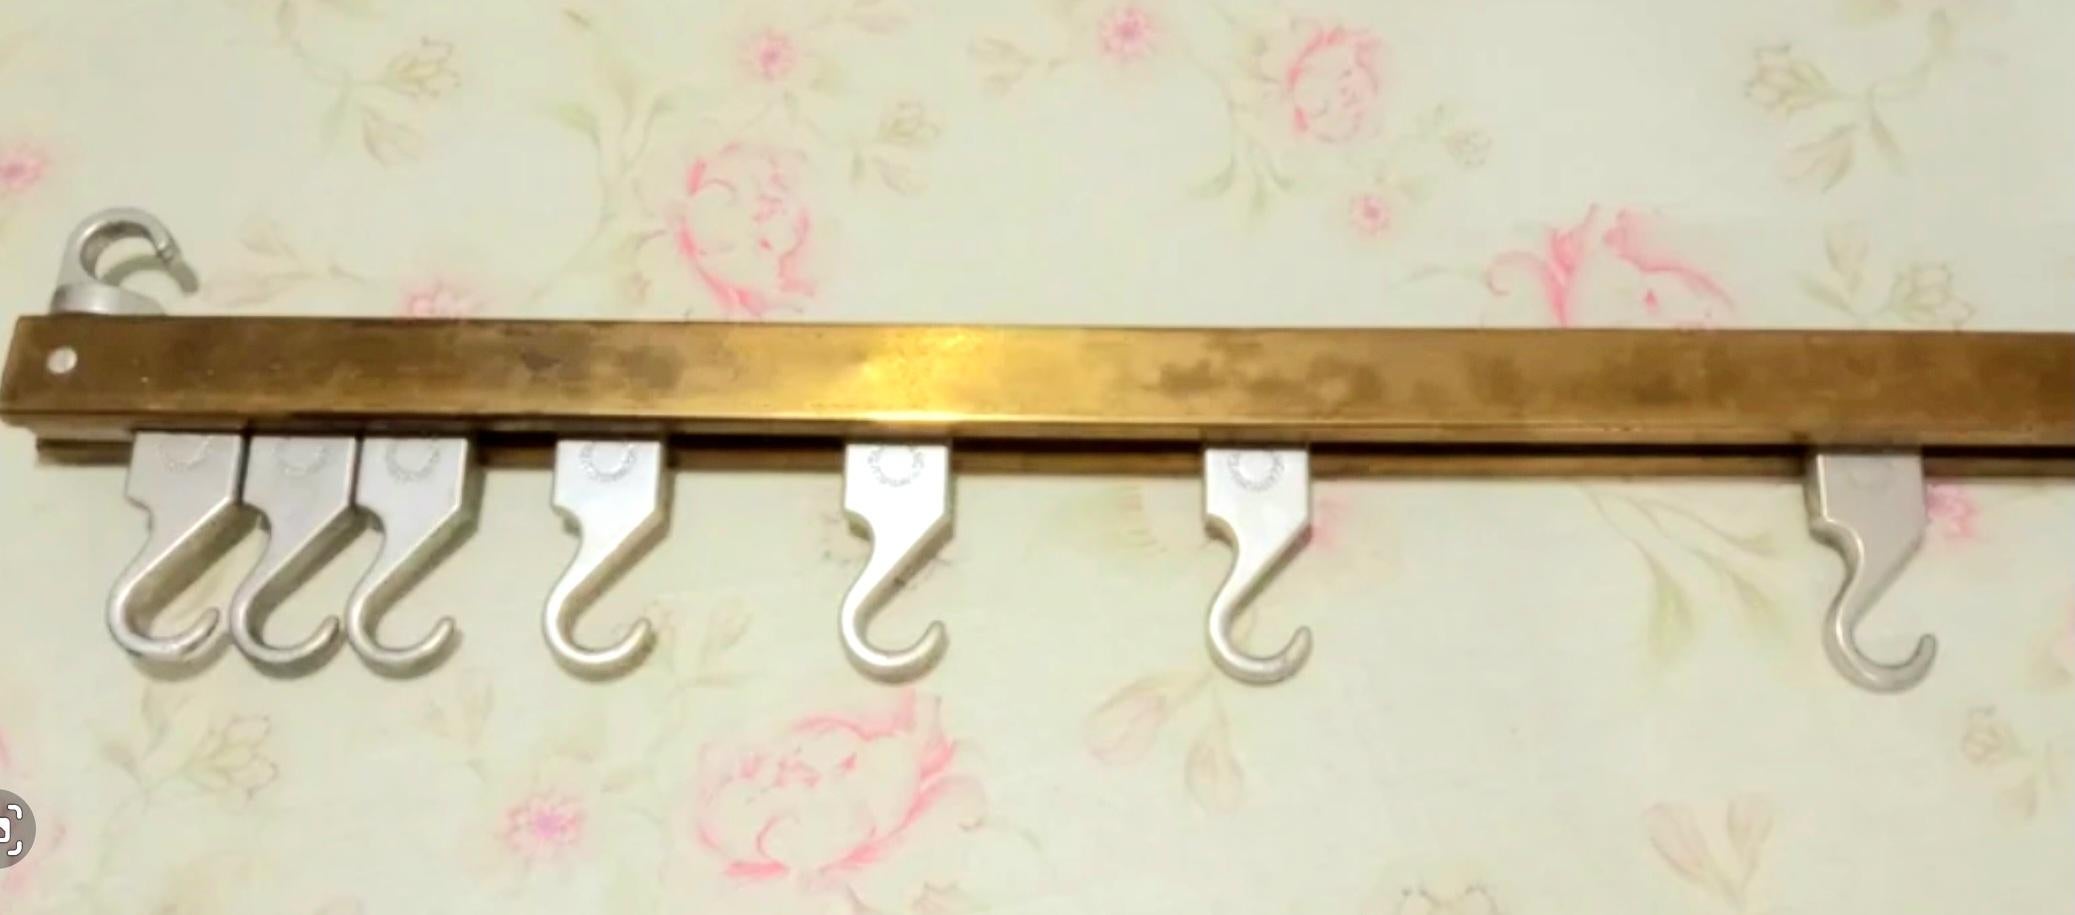 20th Century Butcher Hanger  Brass and Steel Whit 7 Movable Hooks.Industrial  Large Size 92cm